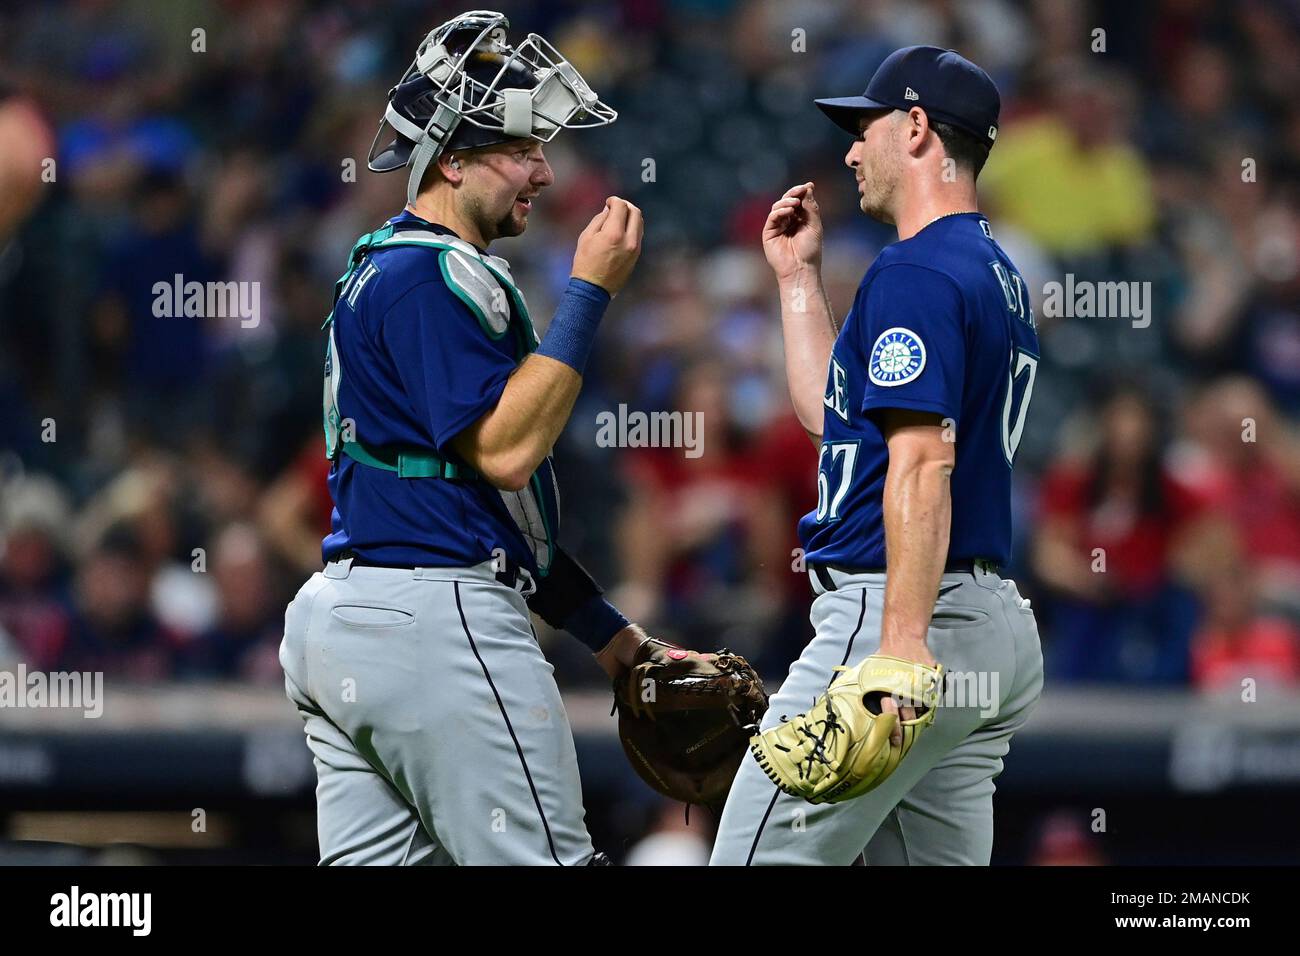 Seattle Mariners relief pitcher Matthew Festa (67) pithes in the